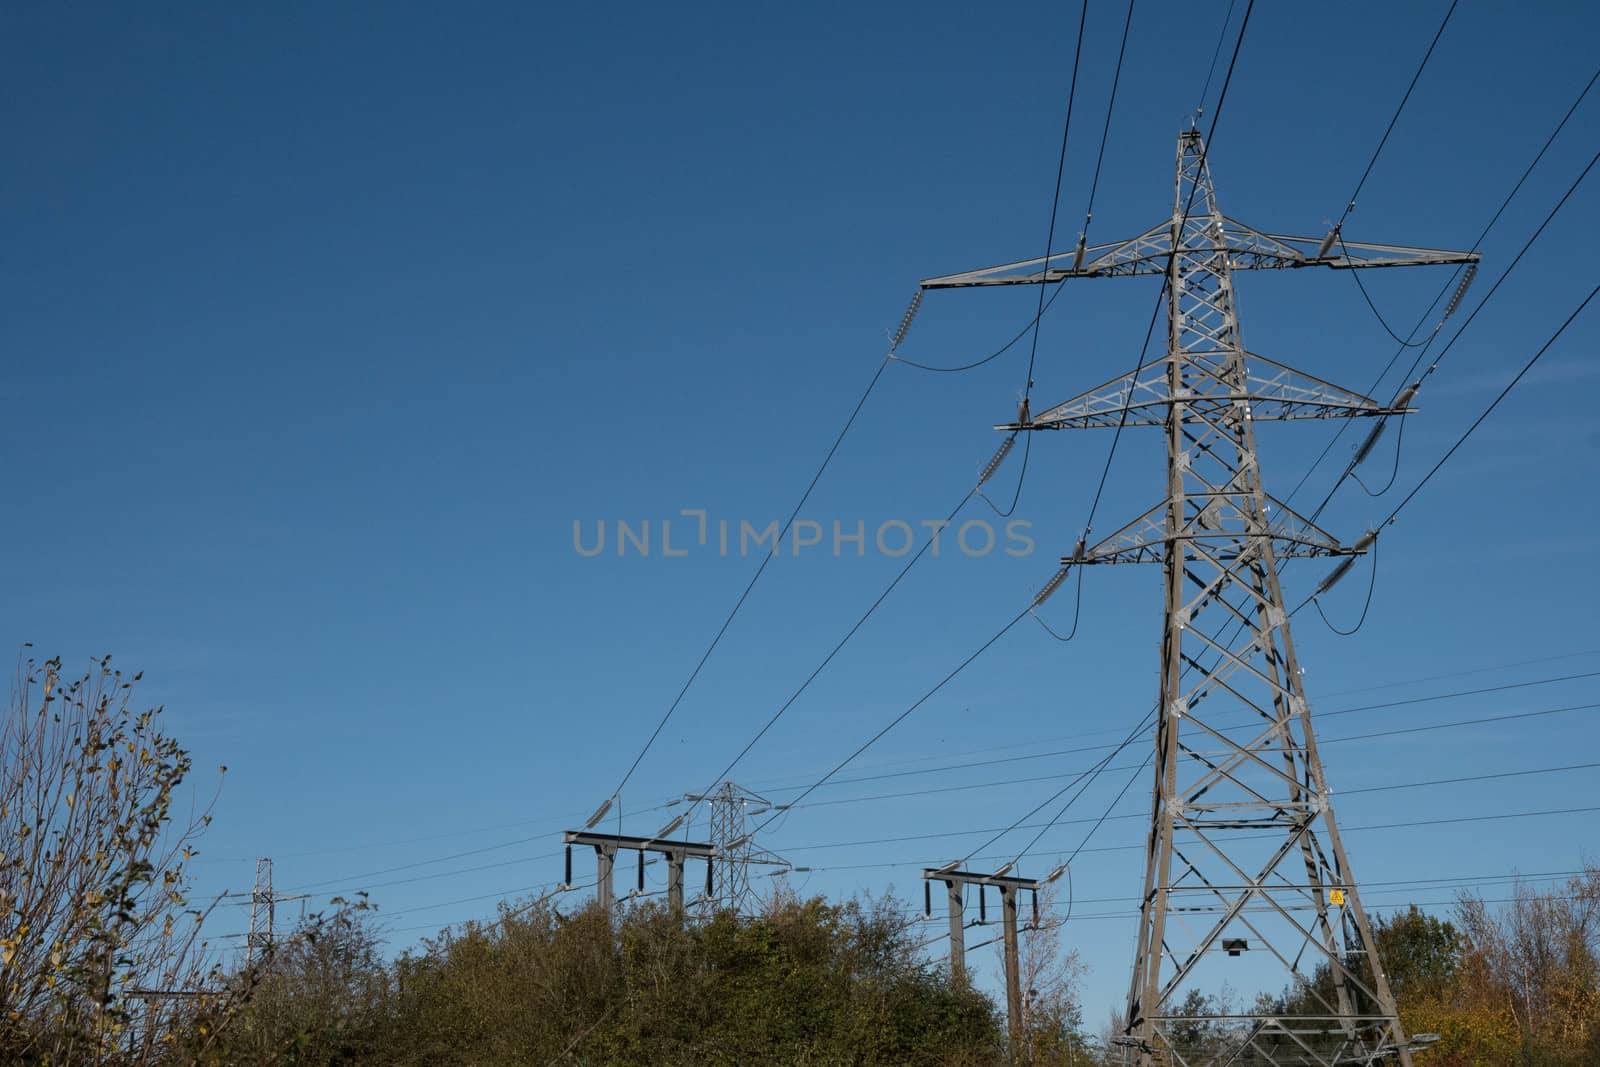 Electricity pylons on the national grid